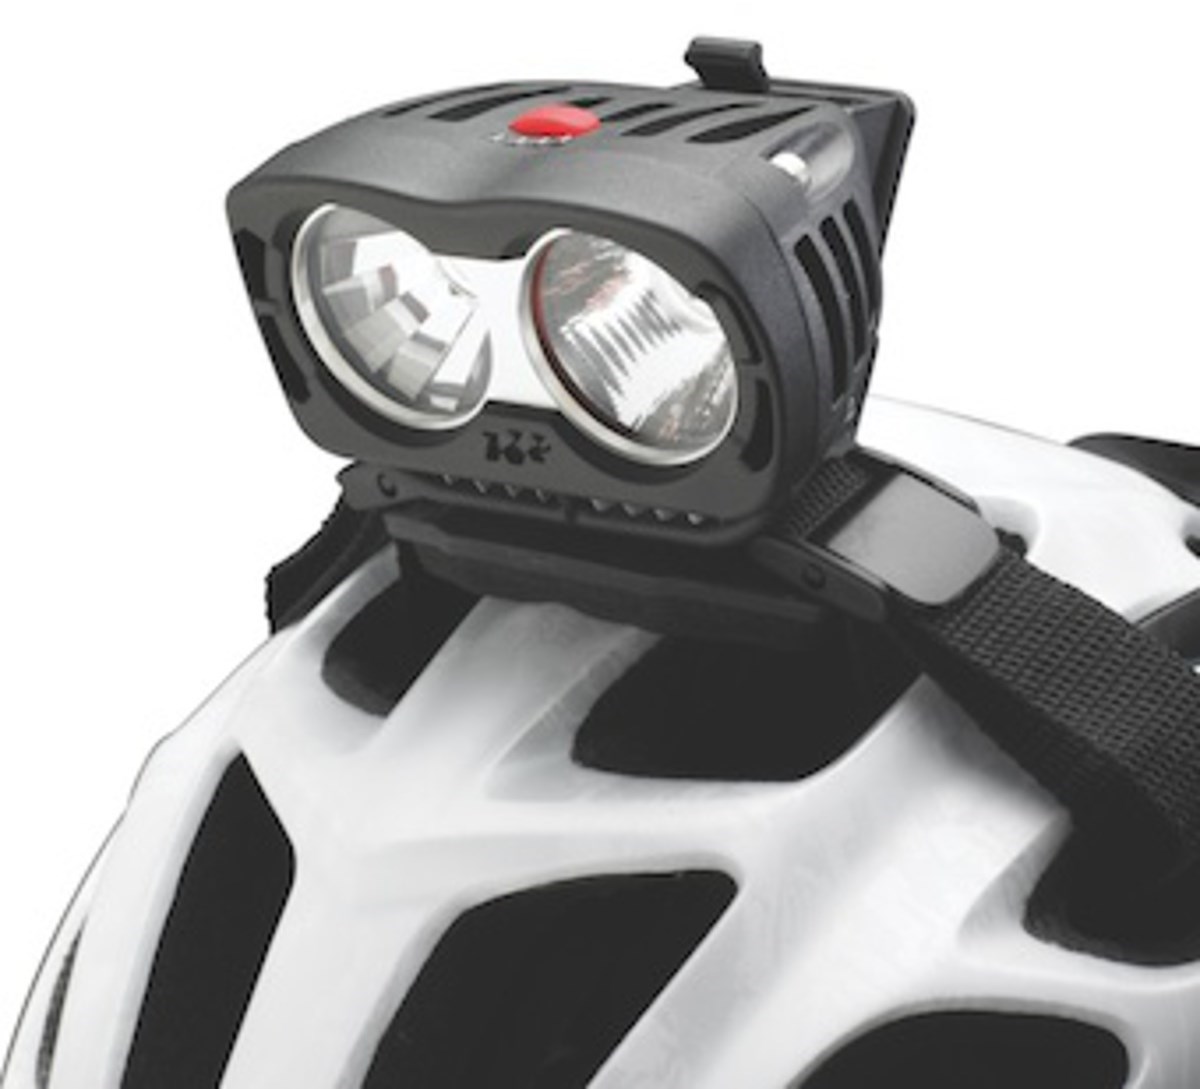 NiteRider Pro 3600 Enduro Rechargeable Front Light product image